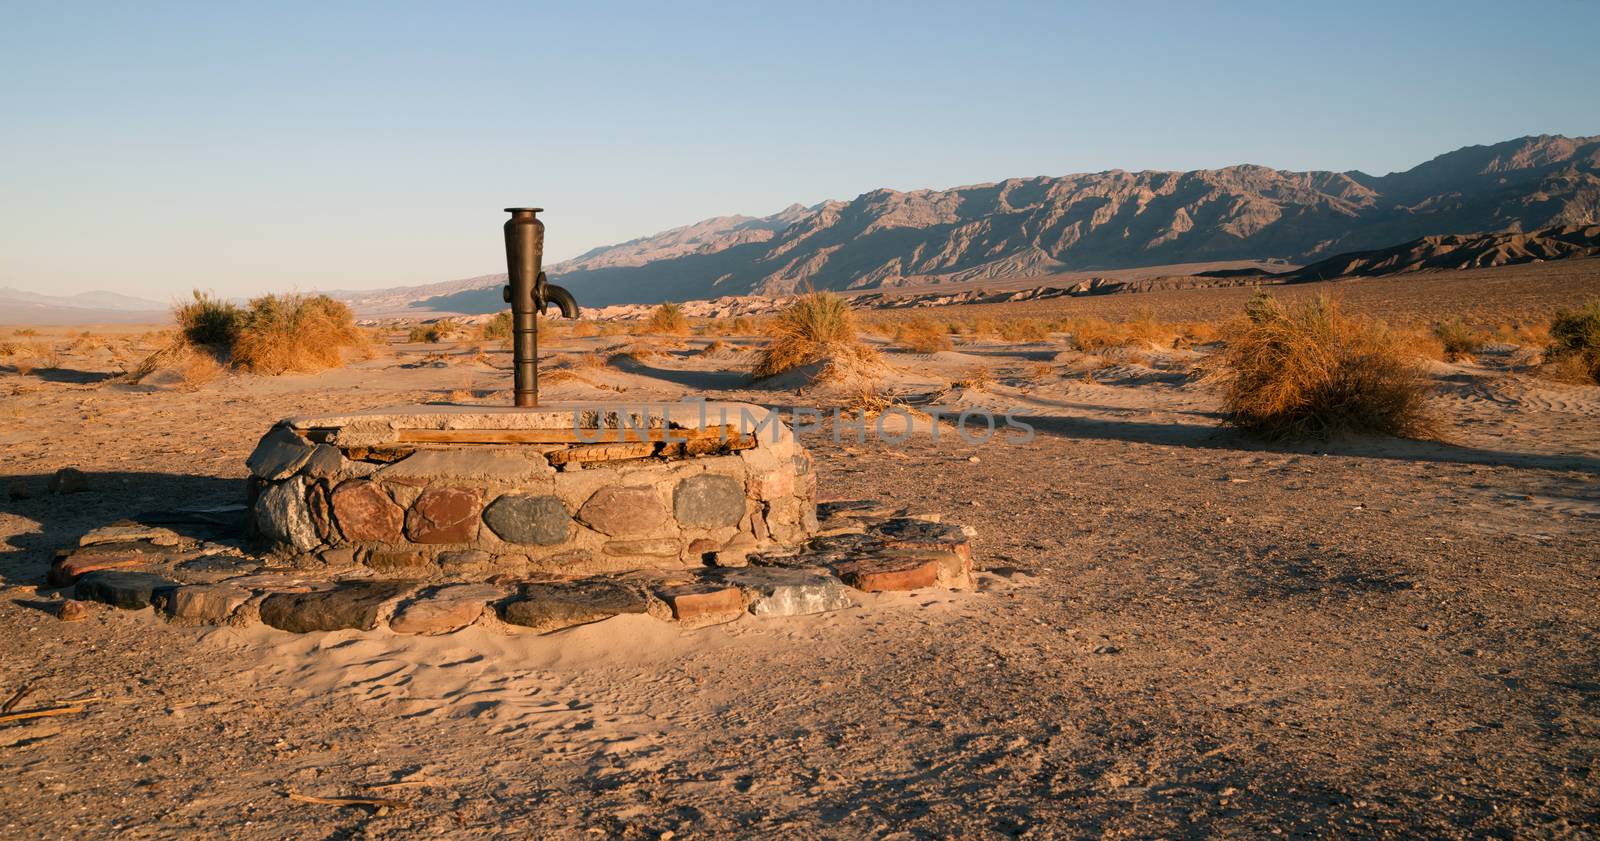 Stovepipe Wells Ancient Dry Well Death Valley California by ChrisBoswell